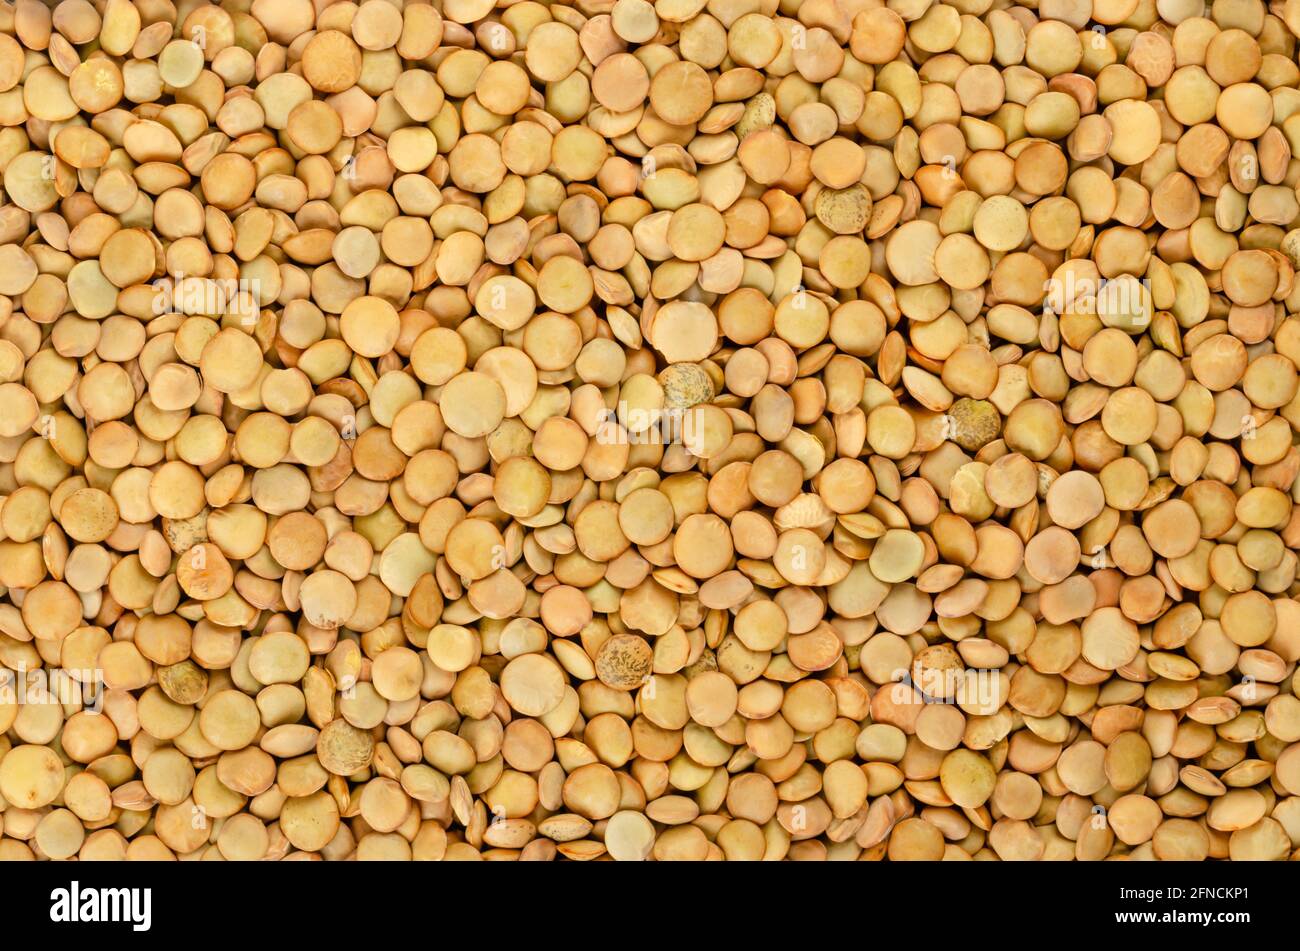 Green lentils, background, from above. Whole raw lens-shaped seeds of Lens culinaris. In cuisines of the Indian subcontinent, lentils are staple. Stock Photo